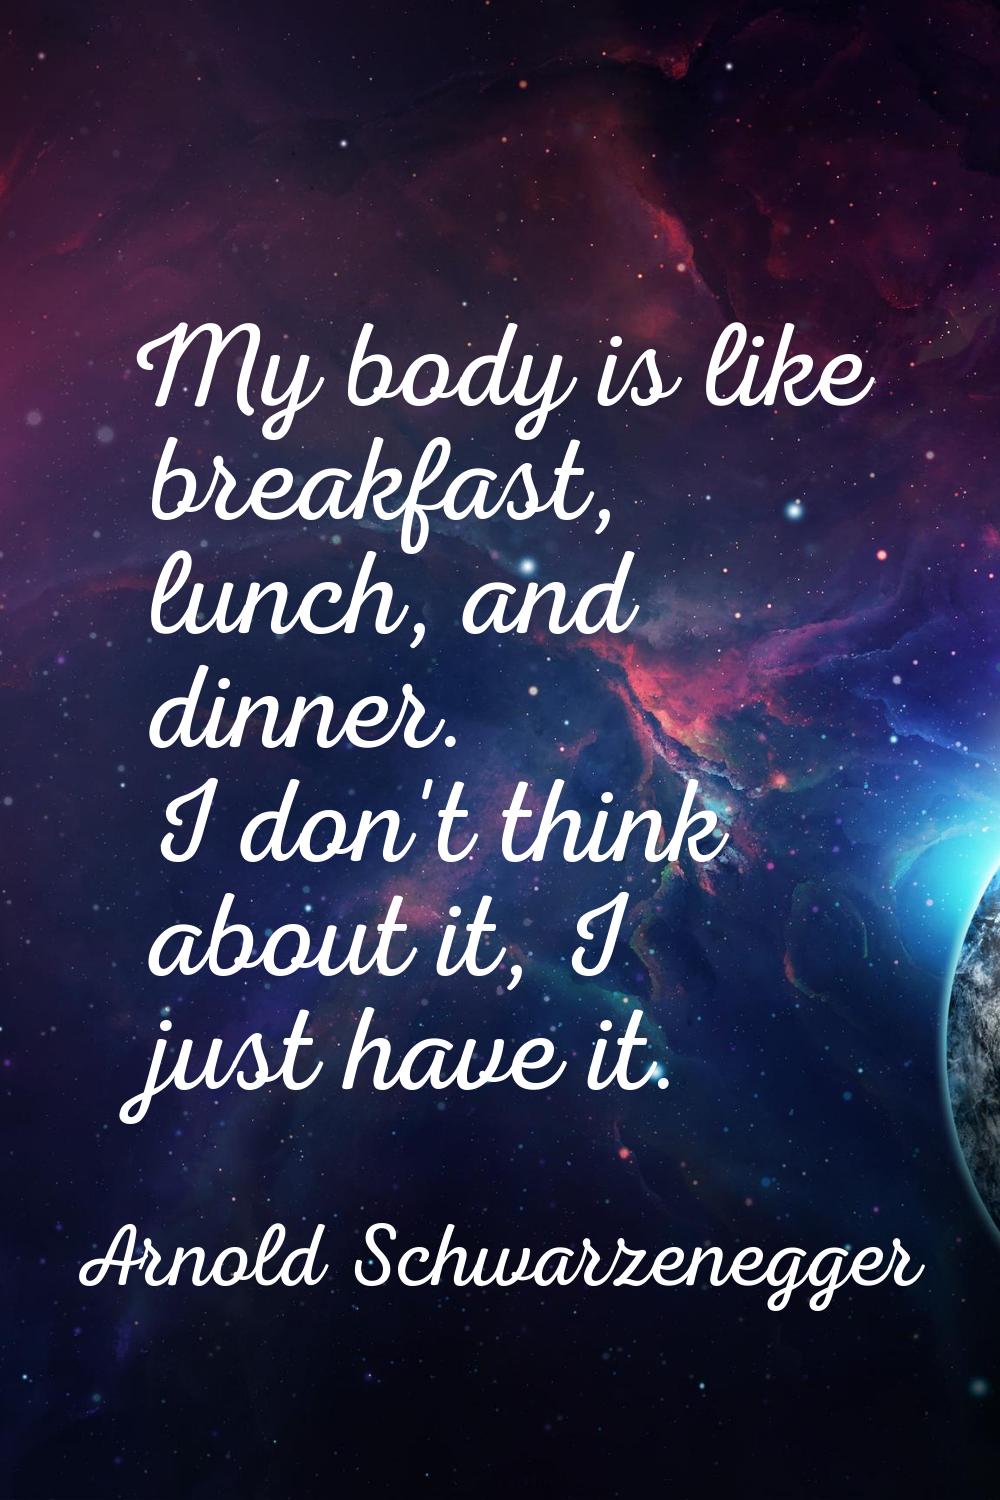 My body is like breakfast, lunch, and dinner. I don't think about it, I just have it.